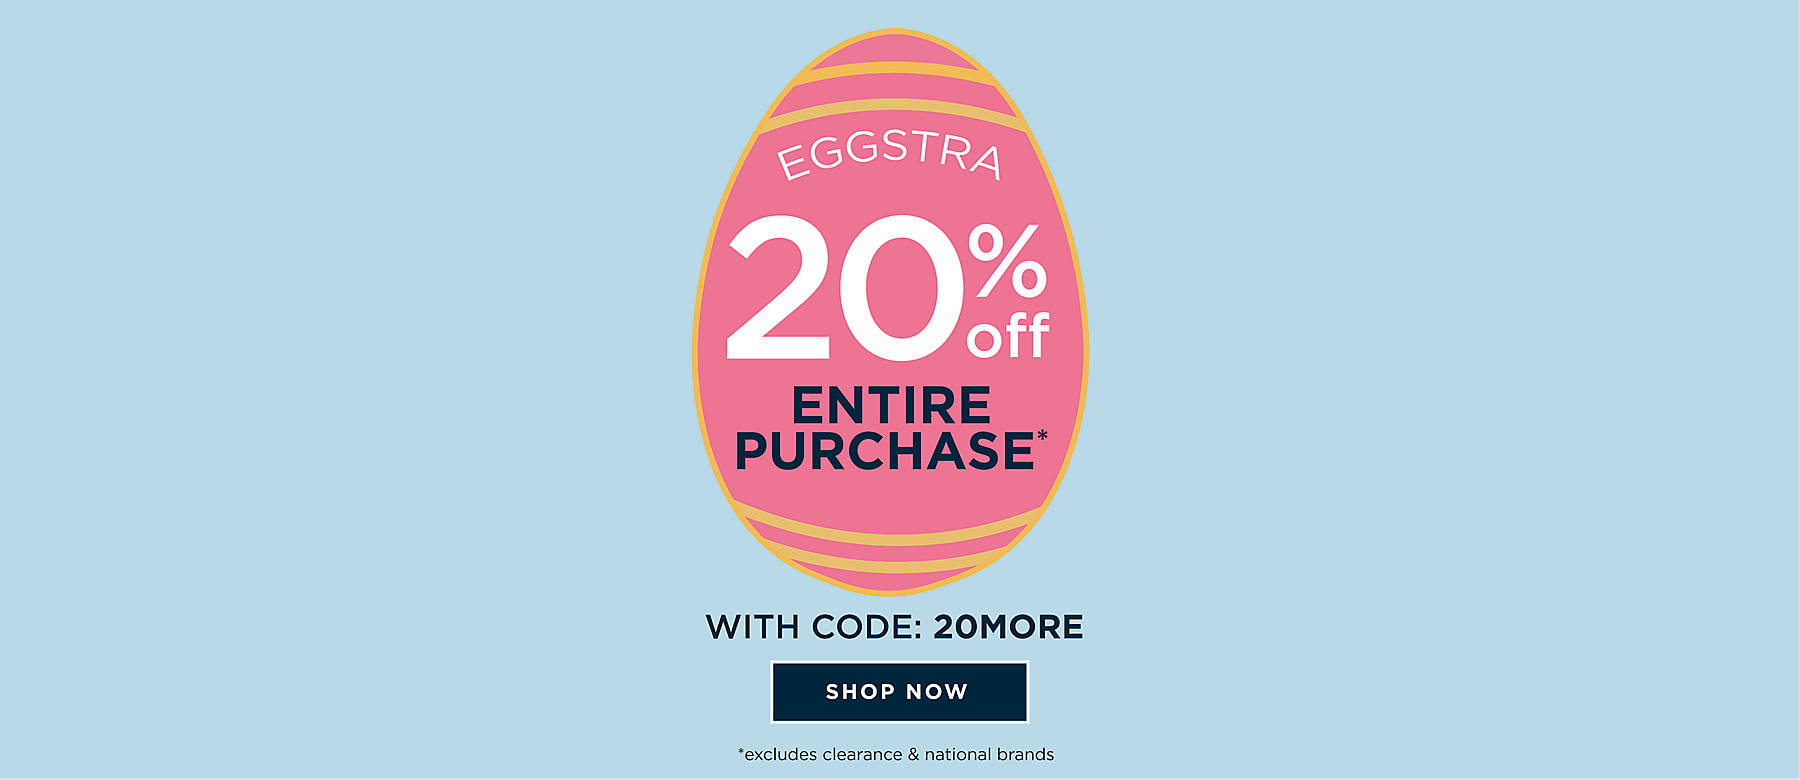 eggstra 20% off entire purchase* with code: 20MORE shop now *excludes clearance & national brands